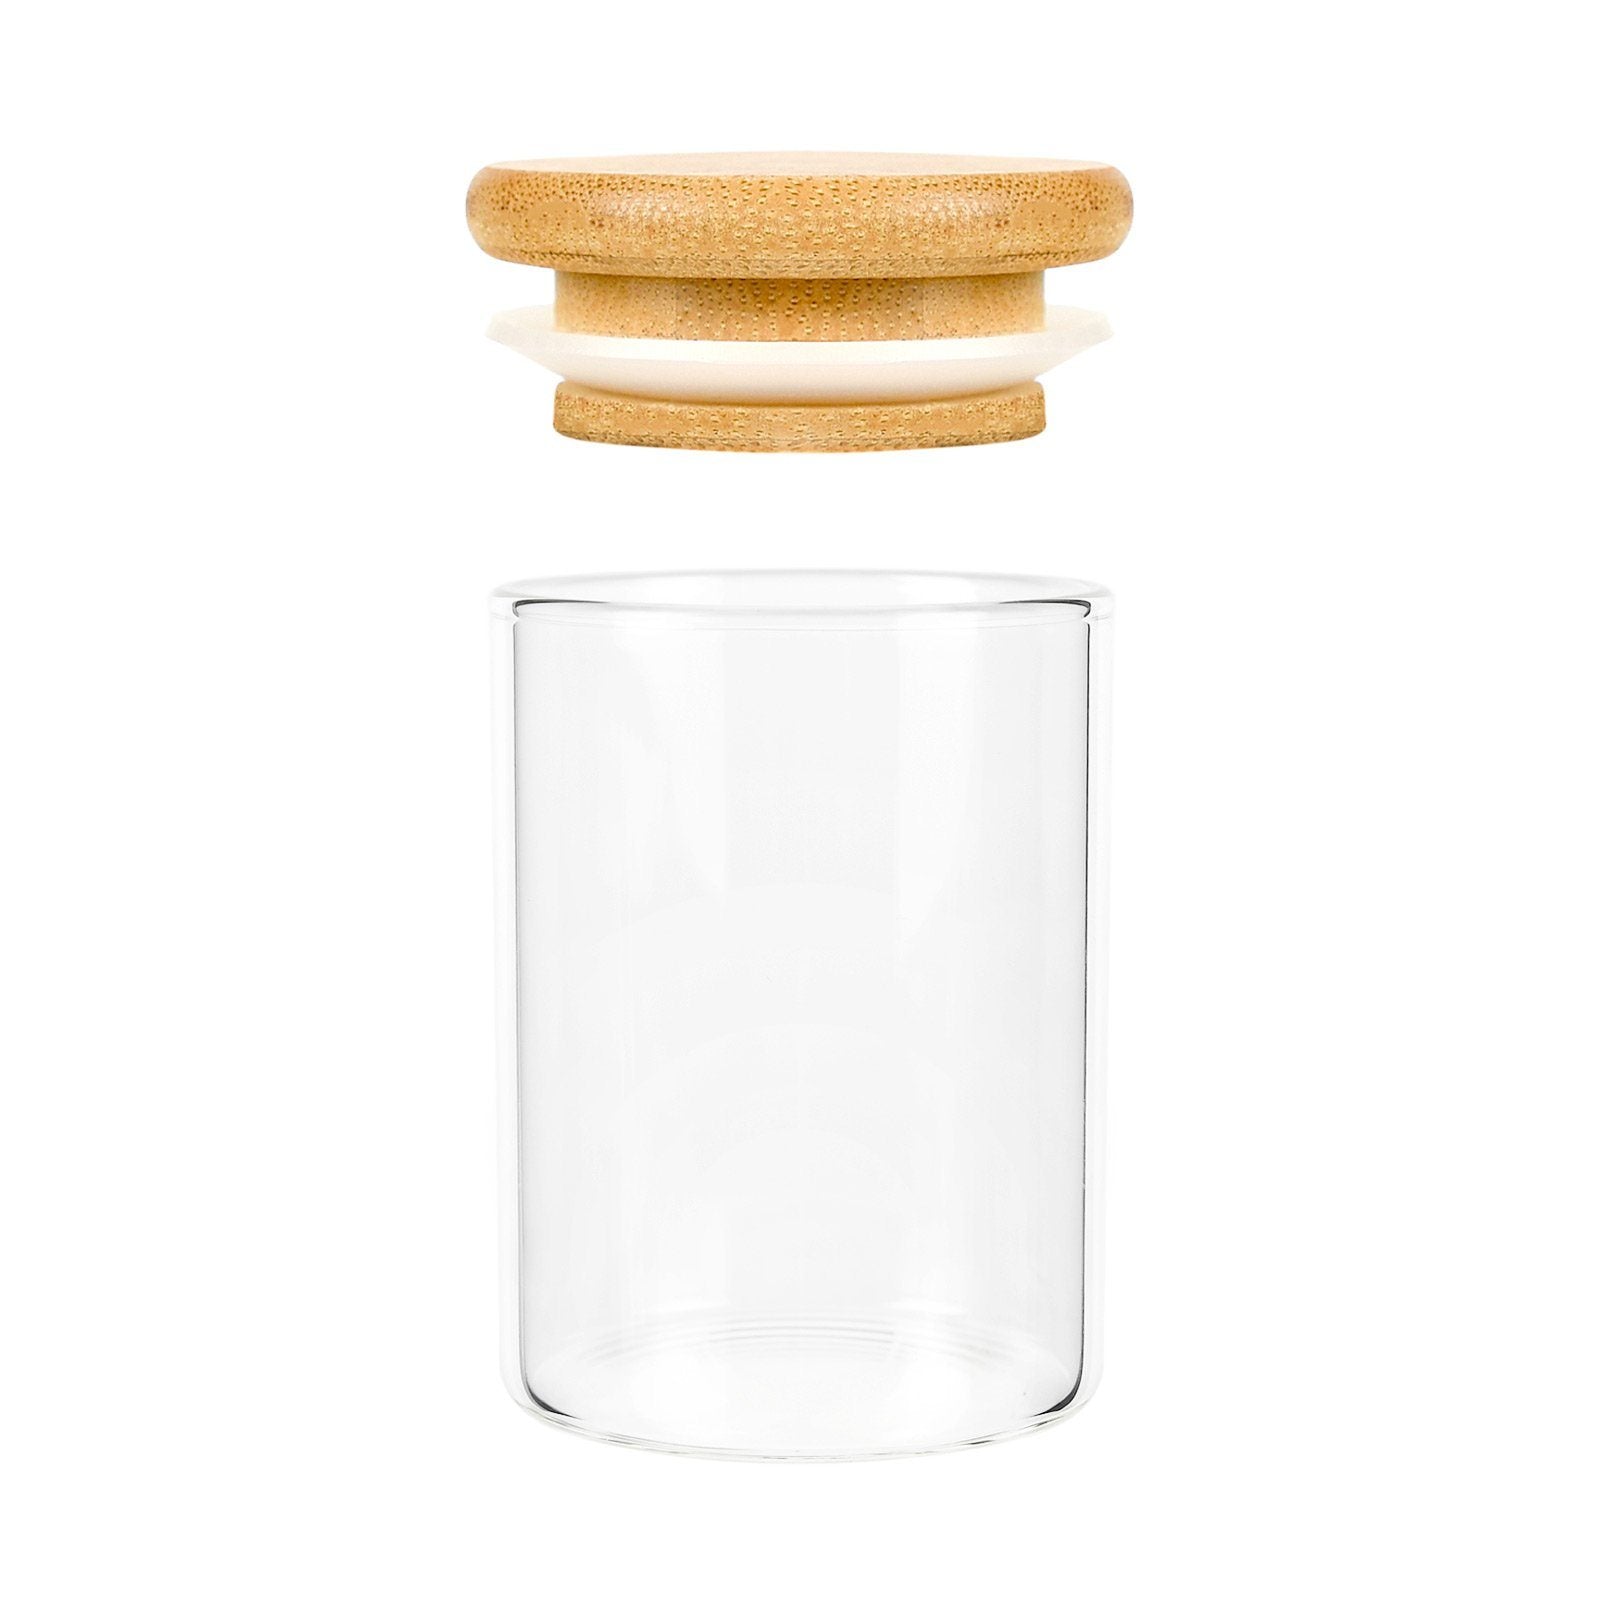 1oz Wood Lid Suction Glass Jars - 1 Gram 200 Count at Flower Power Packages